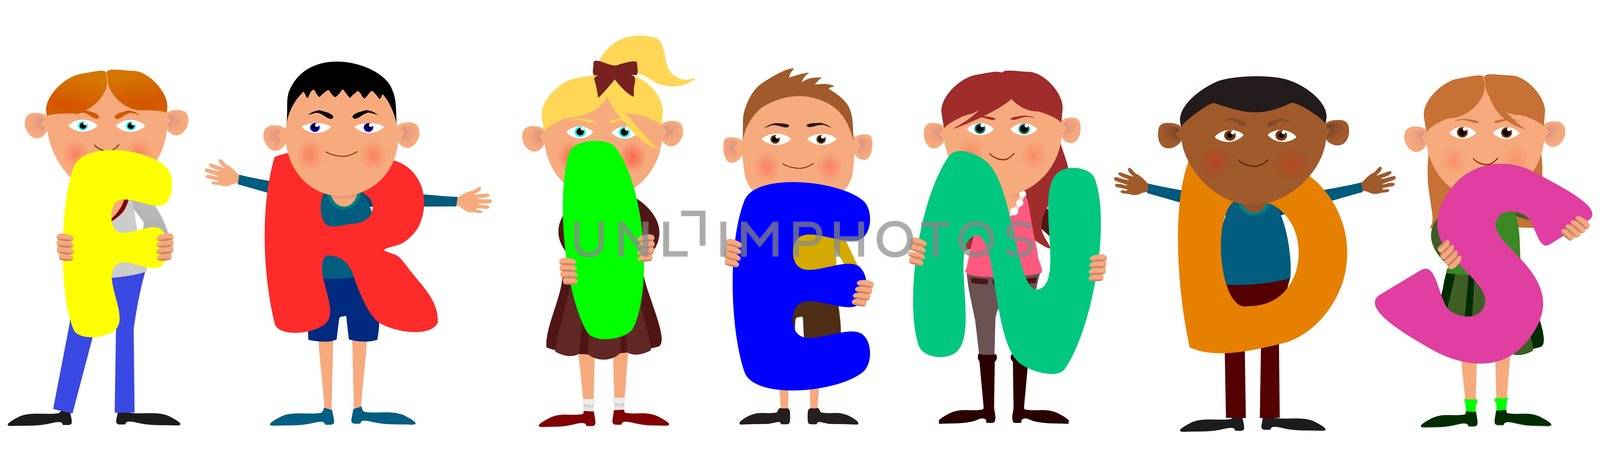 illustration of children holding letters spelling out the word friends